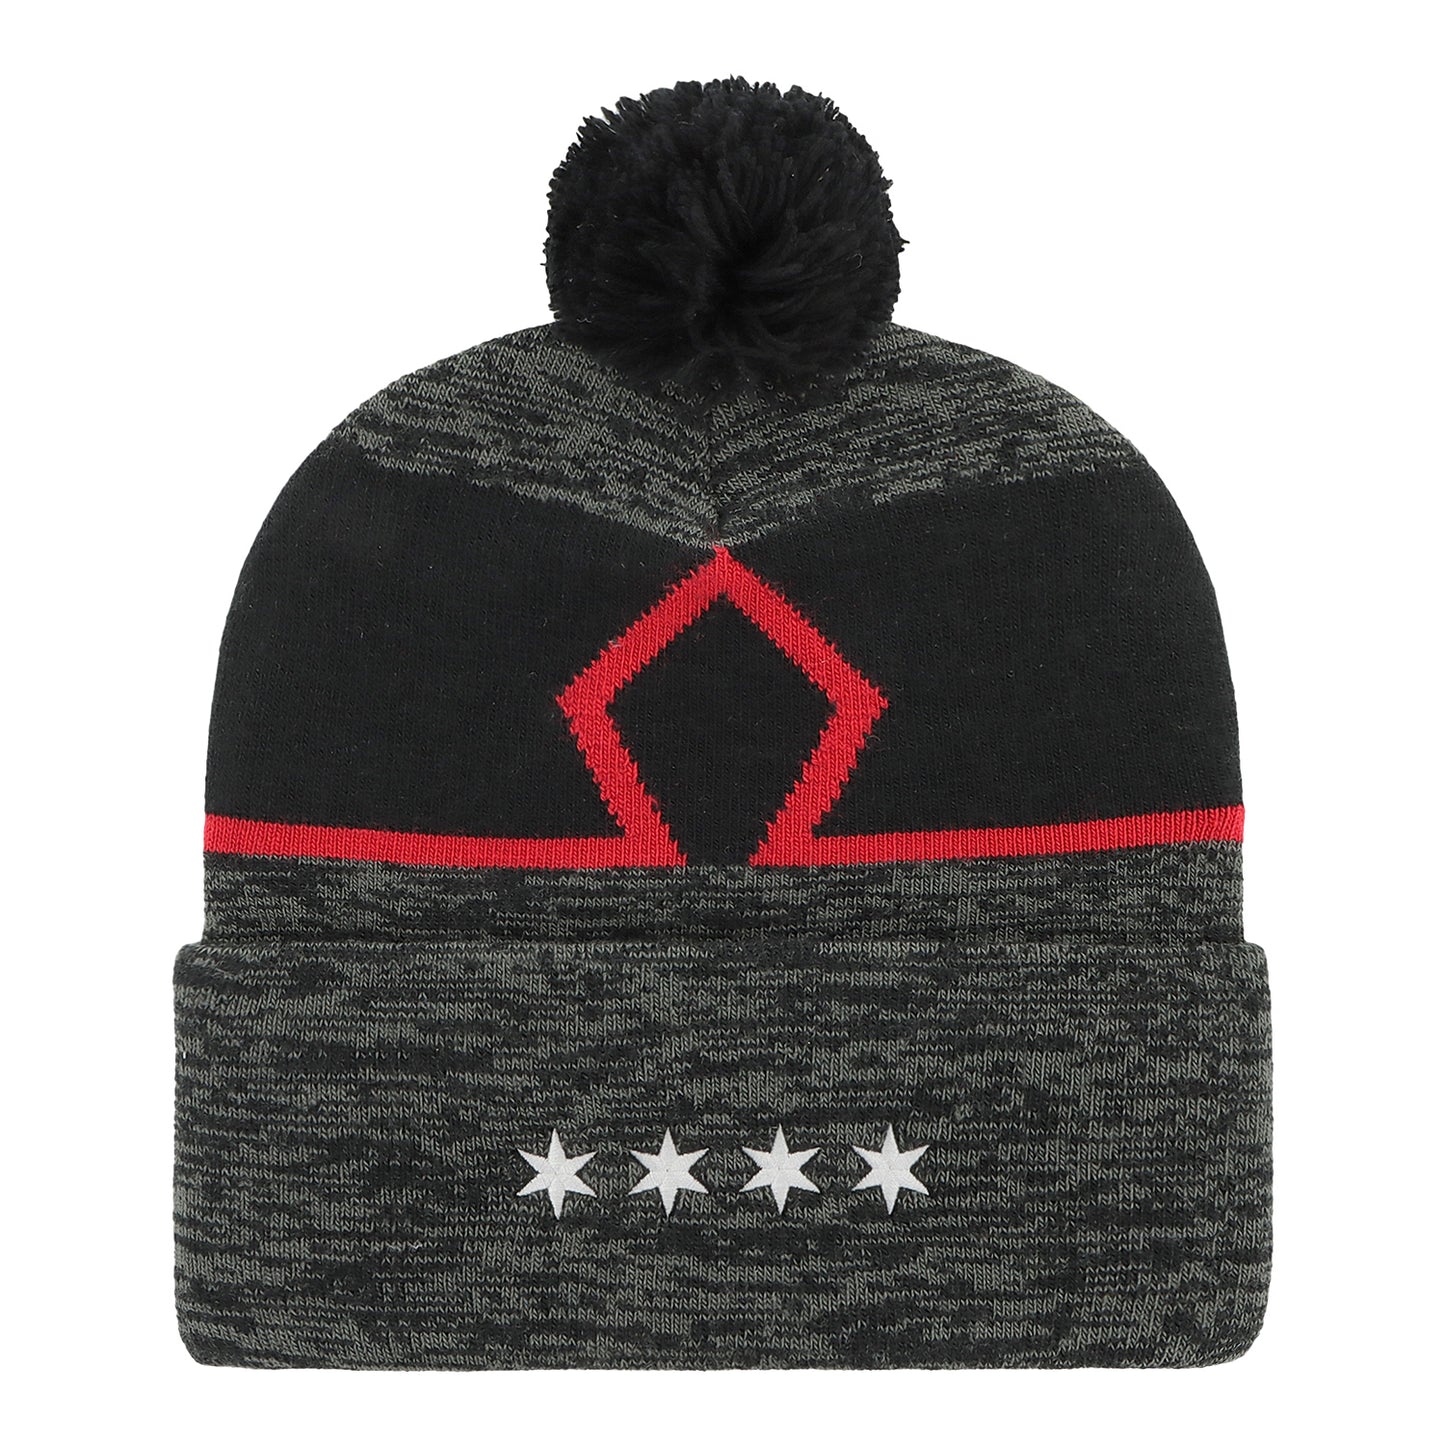 Chicago Bulls City Edition Knit Hat - back view